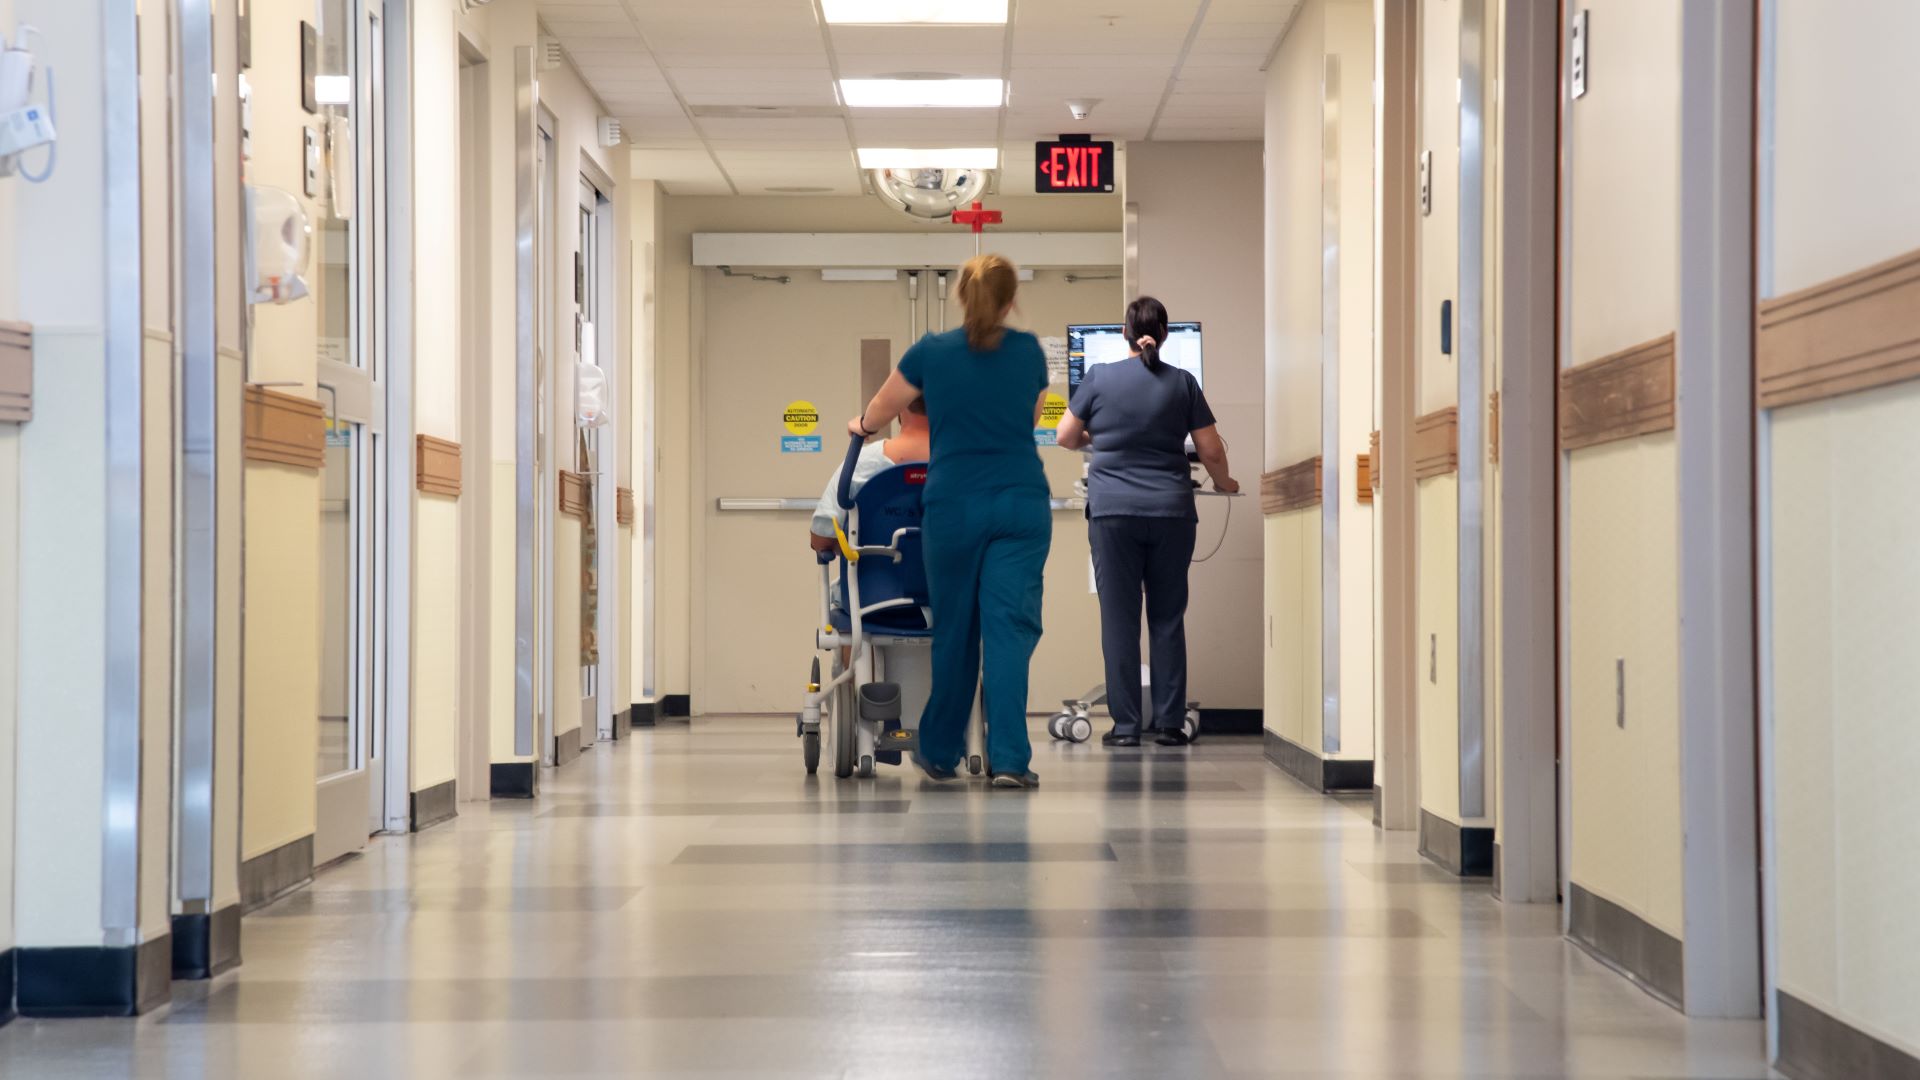 Rural healthcare staff shortages creating crisis in care